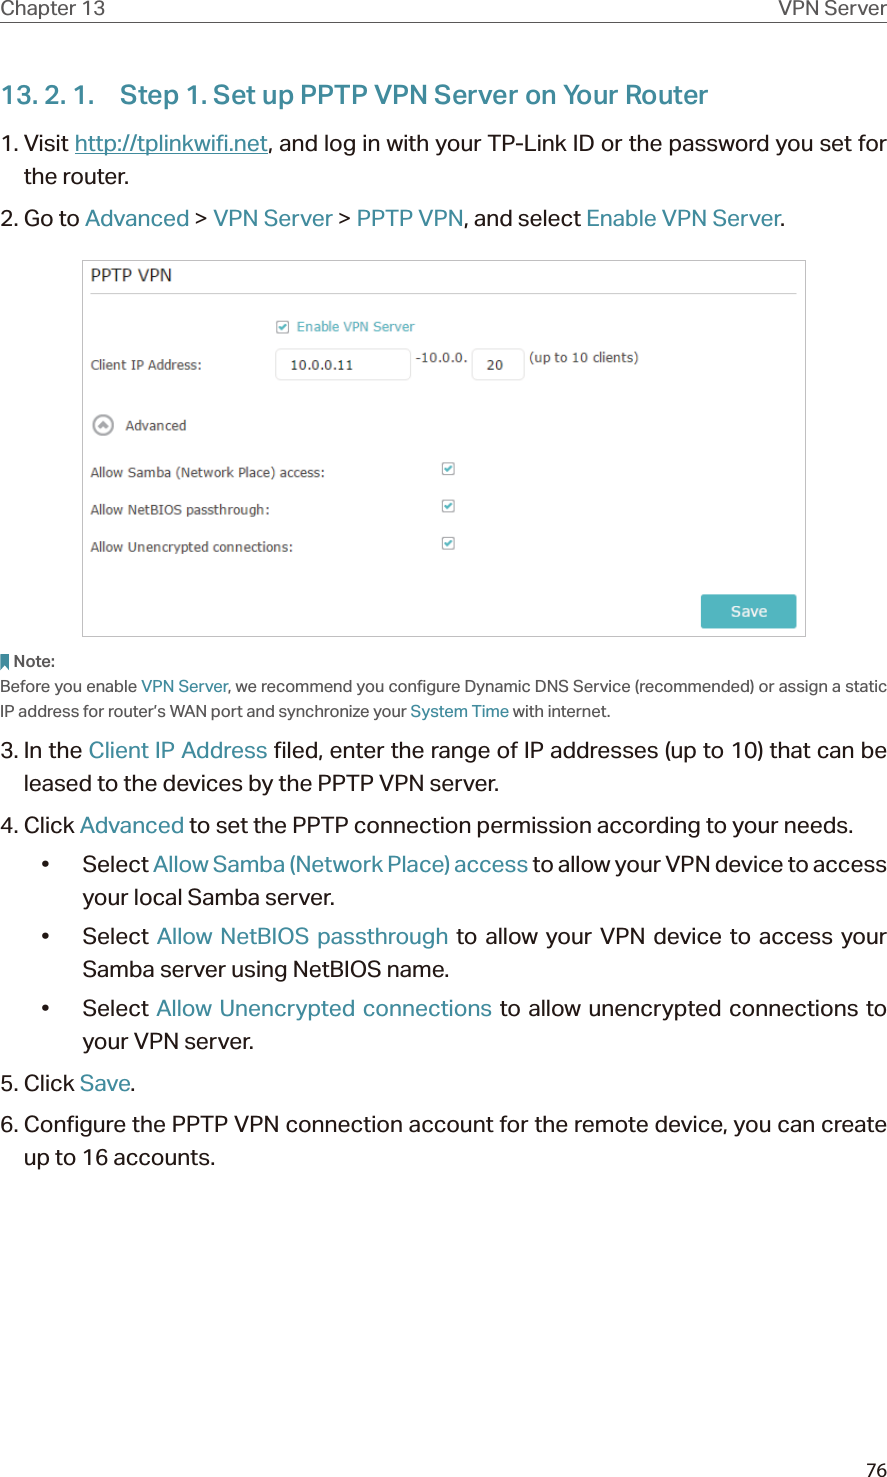 76Chapter 13 VPN Server13. 2. 1.  Step 1. Set up PPTP VPN Server on Your Router1. Visit http://tplinkwifi.net, and log in with your TP-Link ID or the password you set for the router.2. Go to Advanced &gt; VPN Server &gt; PPTP VPN, and select Enable VPN Server.Note:Before you enable VPN Server, we recommend you configure Dynamic DNS Service (recommended) or assign a static IP address for router’s WAN port and synchronize your System Time with internet.3. In the Client IP Address filed, enter the range of IP addresses (up to 10) that can be leased to the devices by the PPTP VPN server.4. Click Advanced to set the PPTP connection permission according to your needs.• Select Allow Samba (Network Place) access to allow your VPN device to access your local Samba server.• Select Allow NetBIOS passthrough to allow your VPN device to access your Samba server using NetBIOS name.• Select Allow Unencrypted connections to allow unencrypted connections to your VPN server.5. Click Save.6. Configure the PPTP VPN connection account for the remote device, you can create up to 16 accounts.